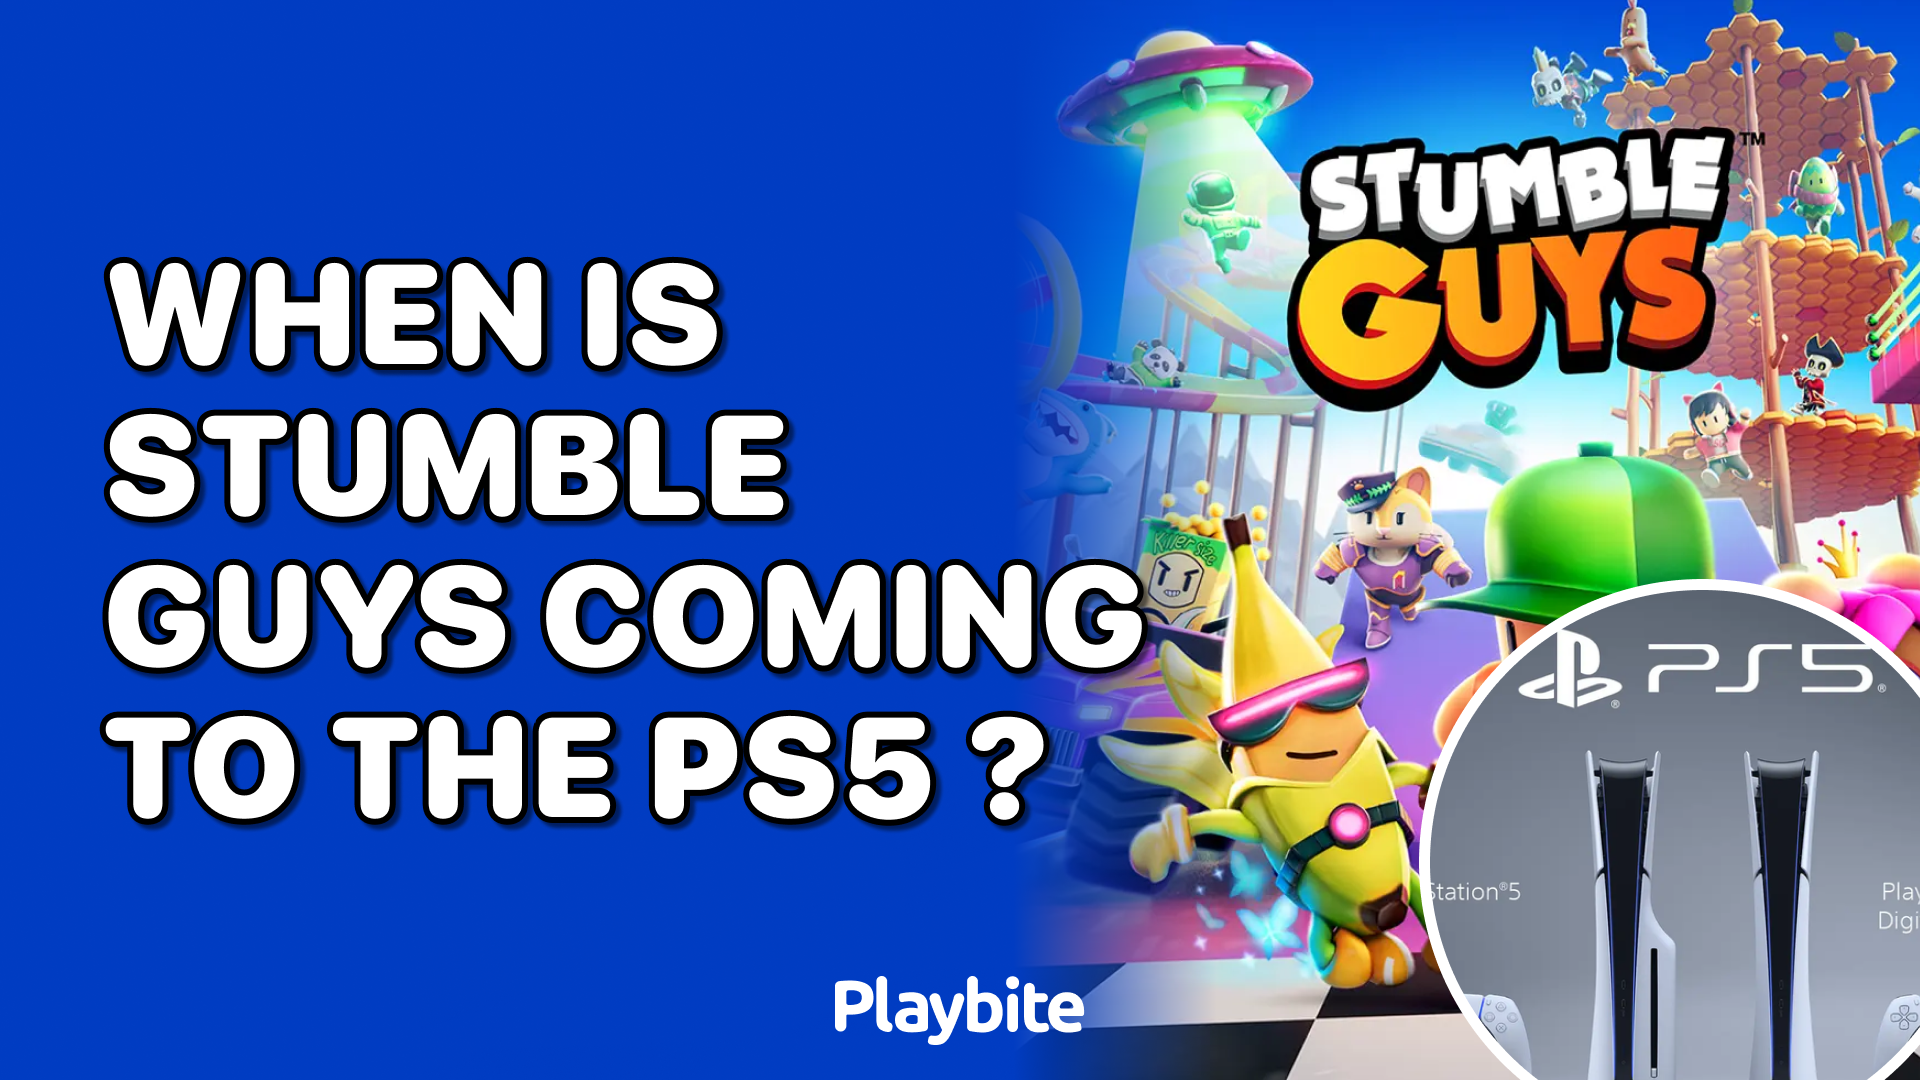 When Is Stumble Guys Coming to PS5 Release?